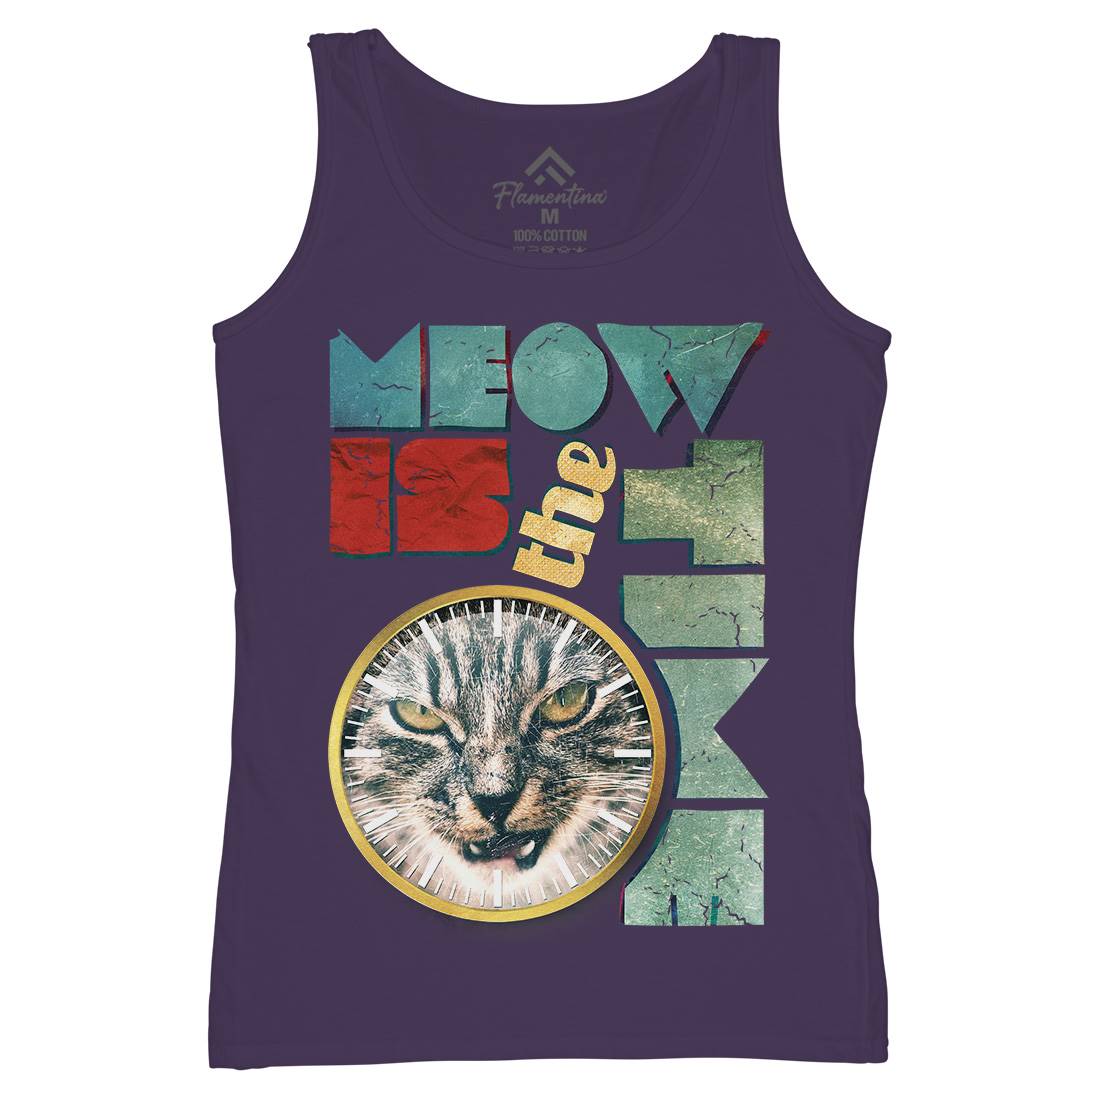 Meow Is The Time Womens Organic Tank Top Vest Animals A876